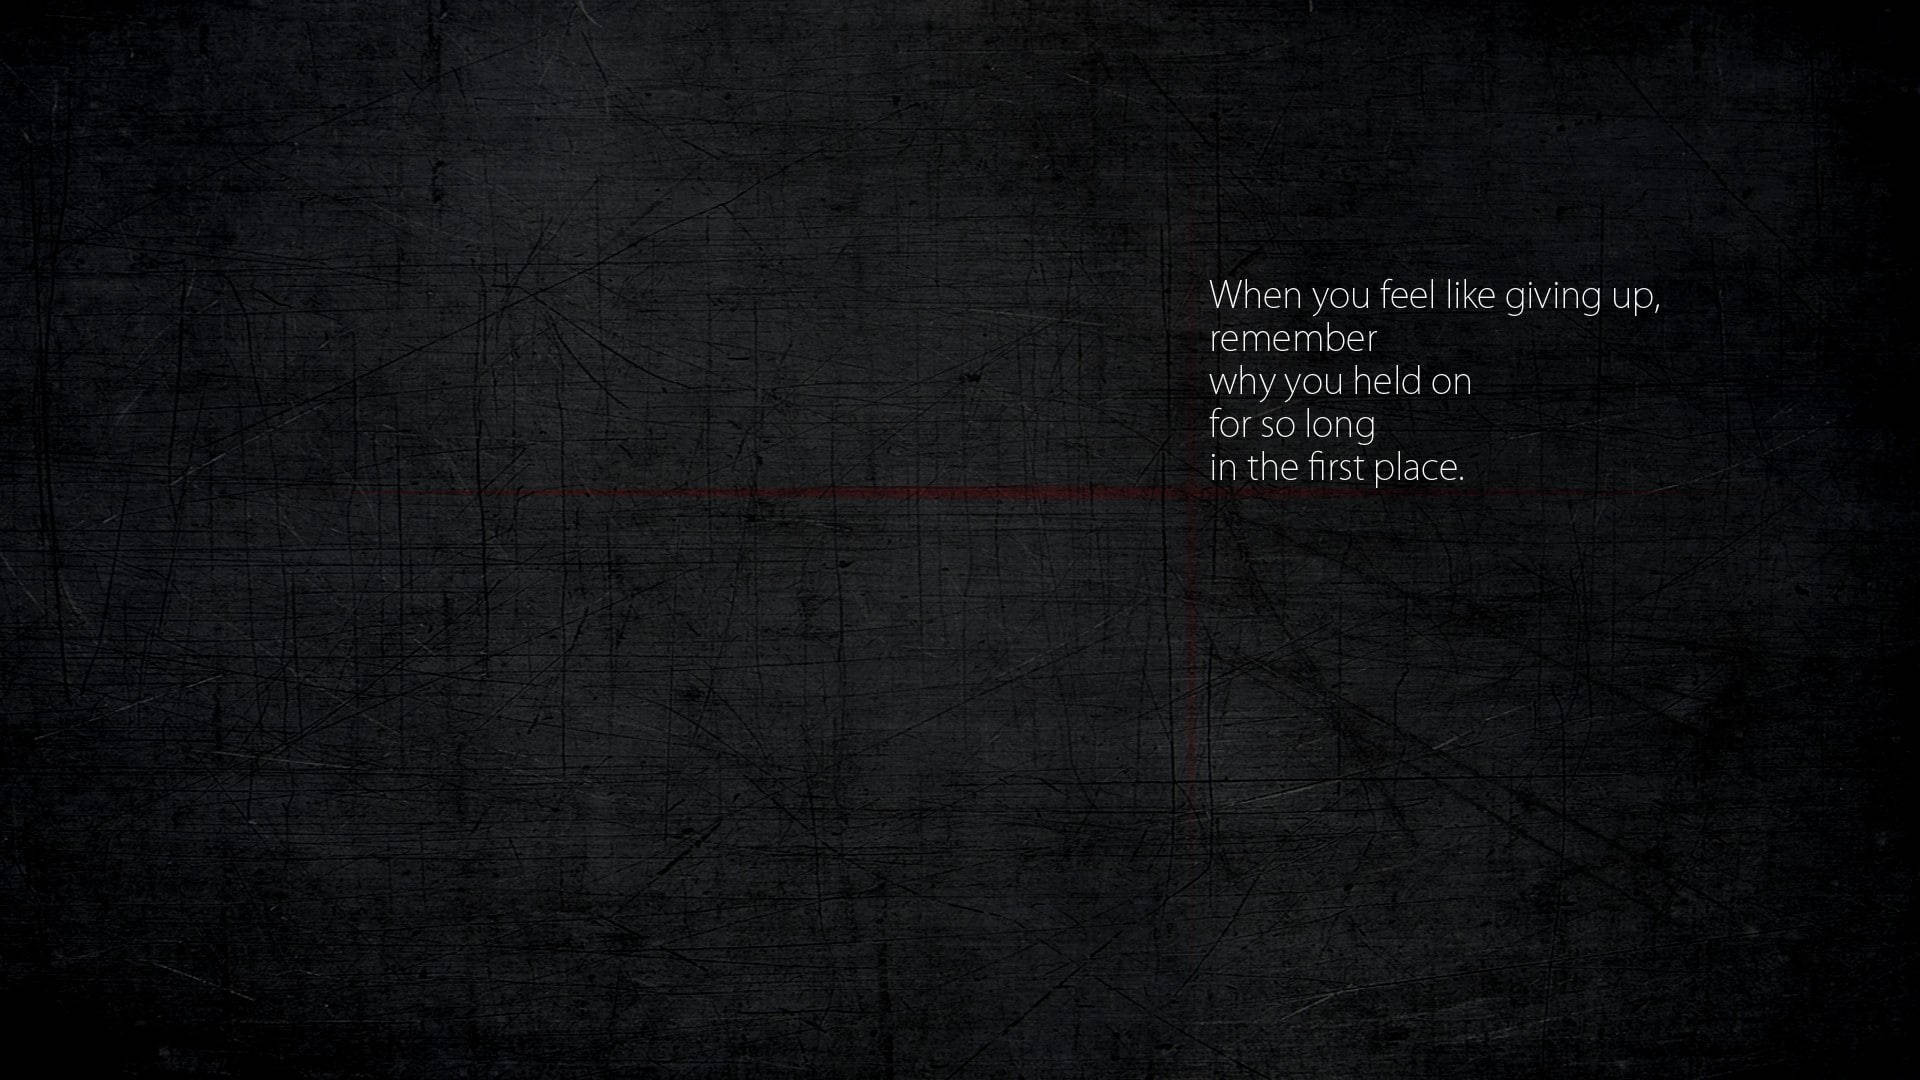 Dark Wall With Motivational Quote Wallpaper